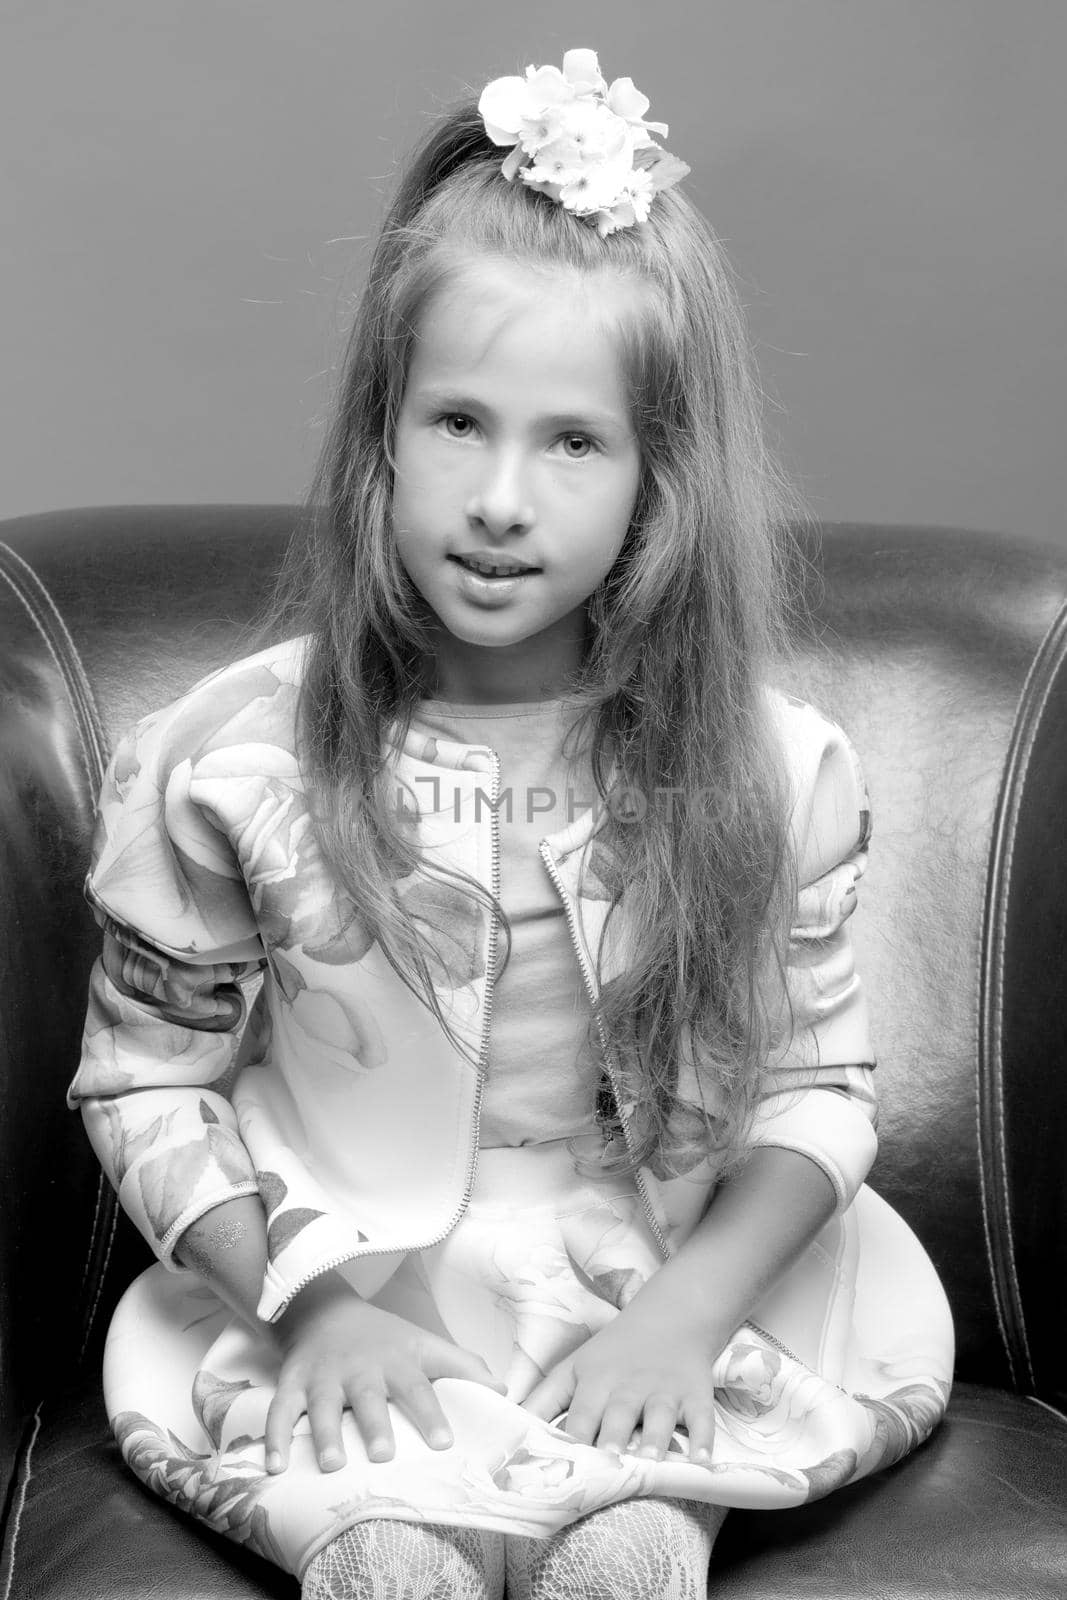 A nice little girl is sitting on a leather chair. The concept of family happiness and home comfort.